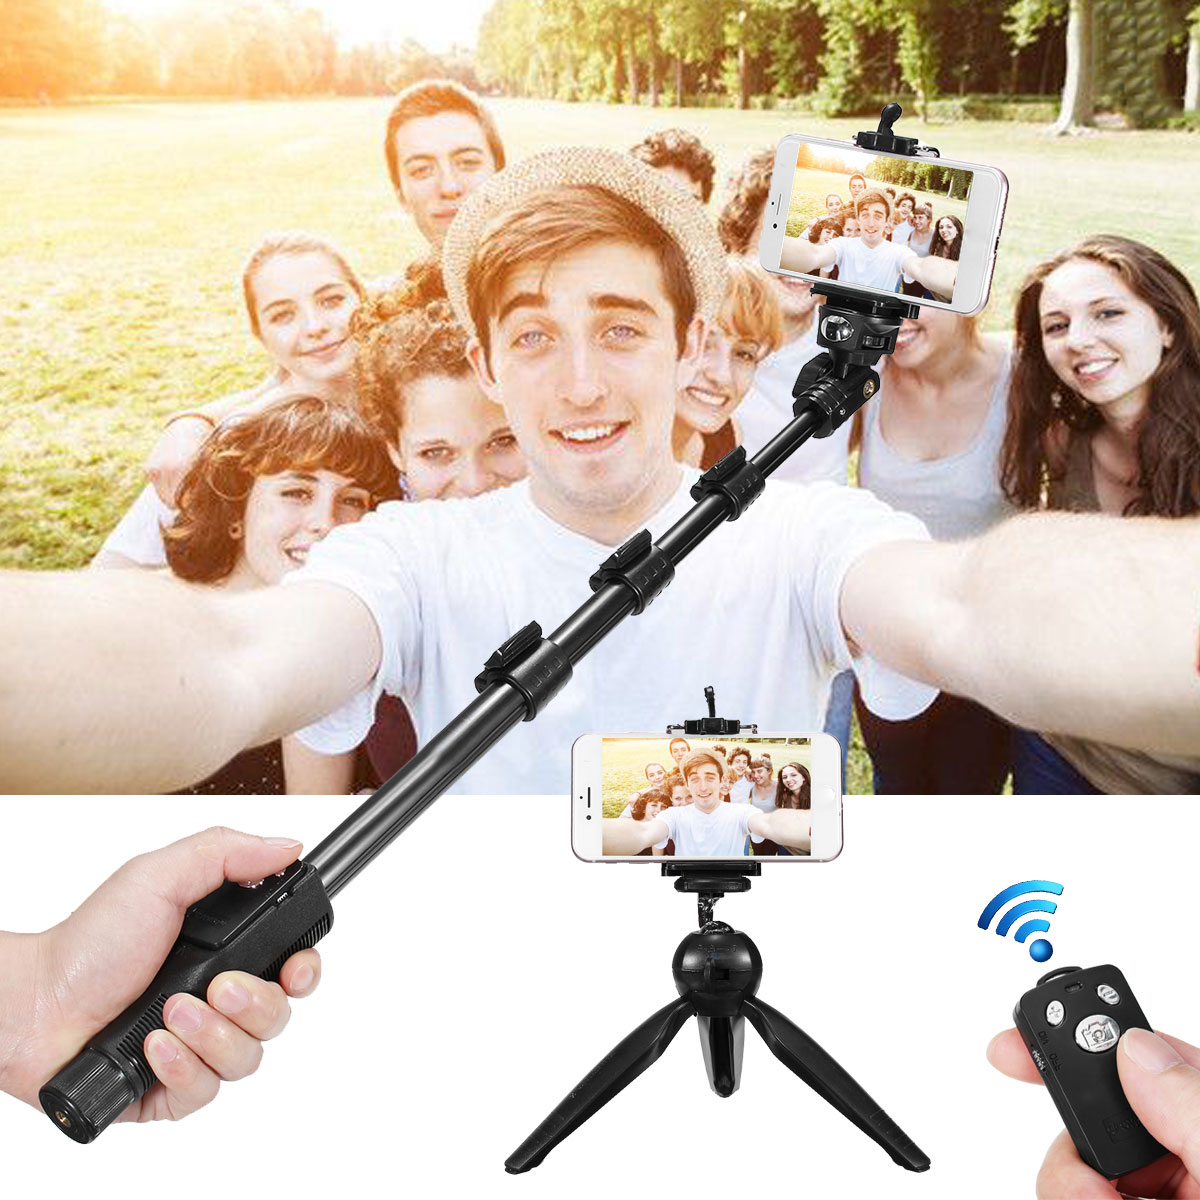 bluetooth-Wireless-Remote-Control-Extendable-Handheld-Selfie-Stick-Monopod--Tripod-for-Camera-Mobile-1340611-1